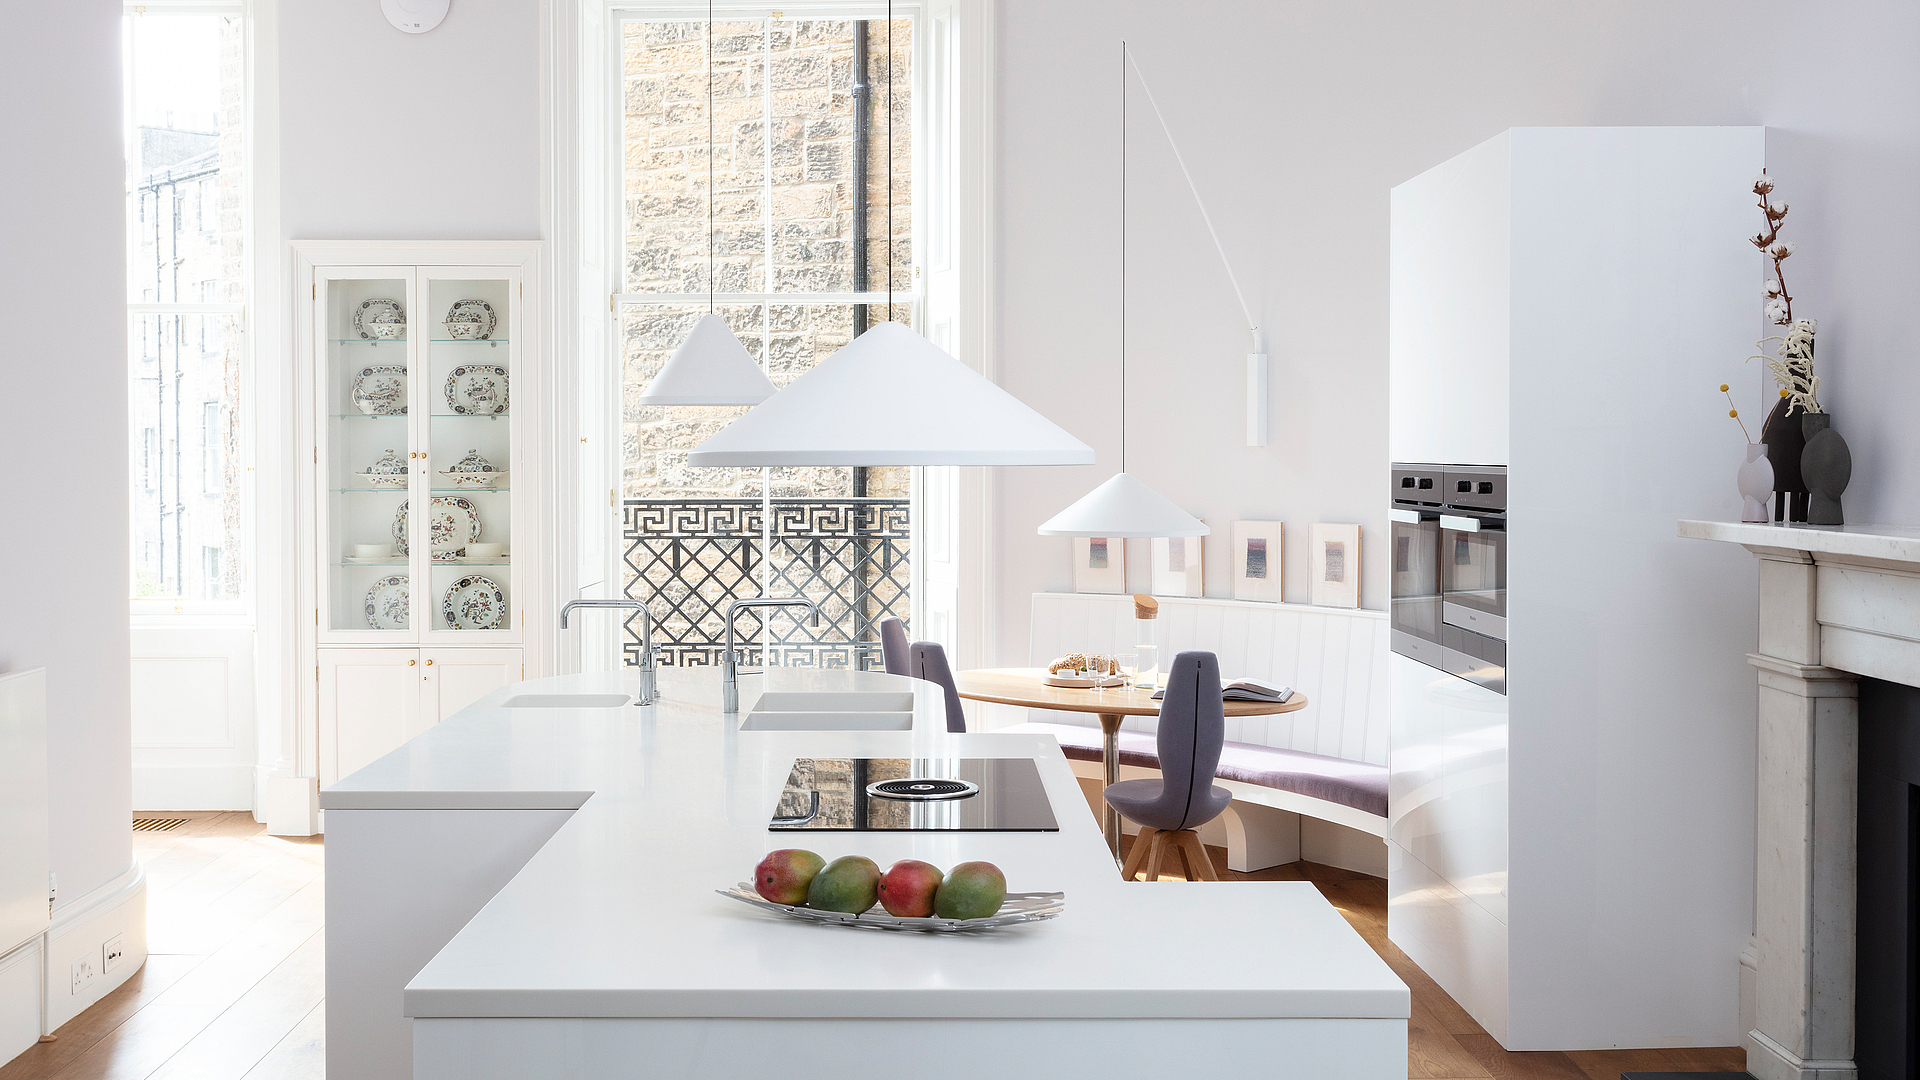 BORA cooktop helps create a stylish cooking paradise in Scotland’s capital